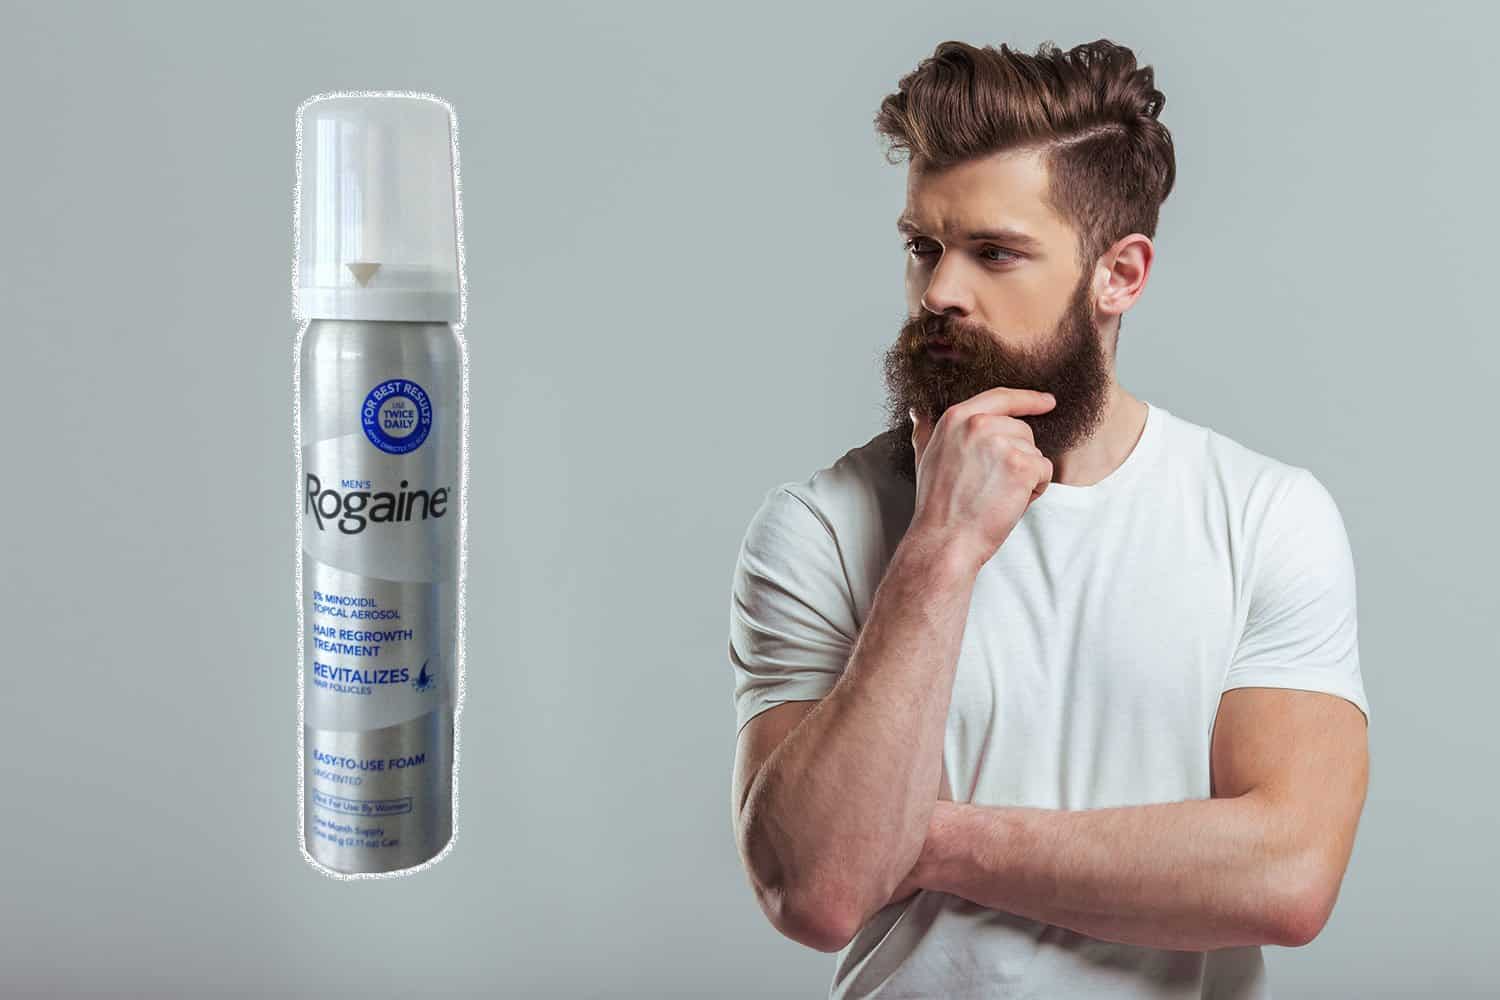 How can you thicken your beard?